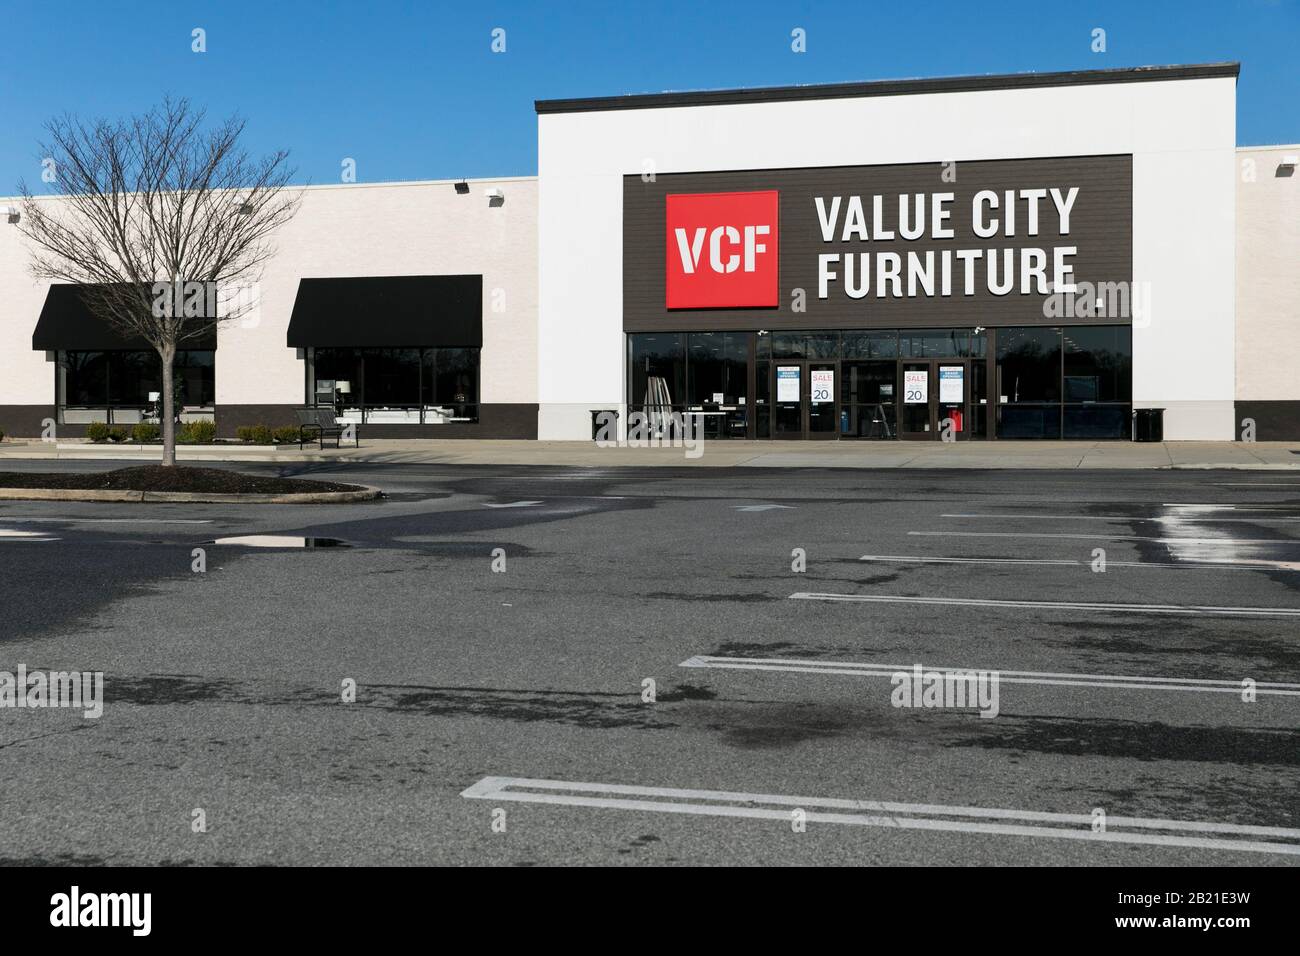 A Logo Sign Outside Of A Value City Furniture Vcf Retail Store